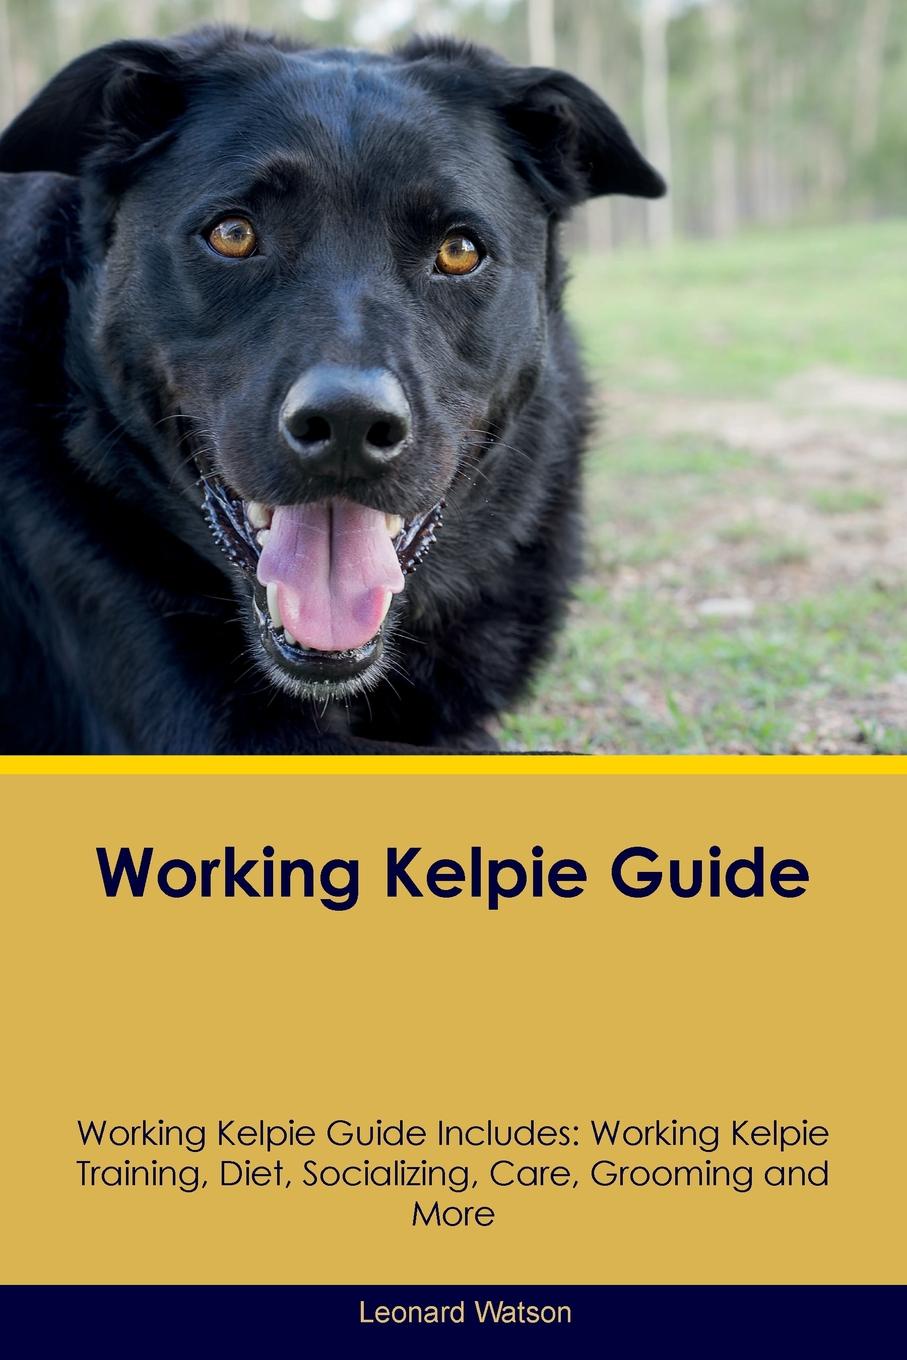 Working Kelpie Guide Working Kelpie Guide Includes. Working Kelpie Training, Diet, Socializing, Care, Grooming, Breeding and More